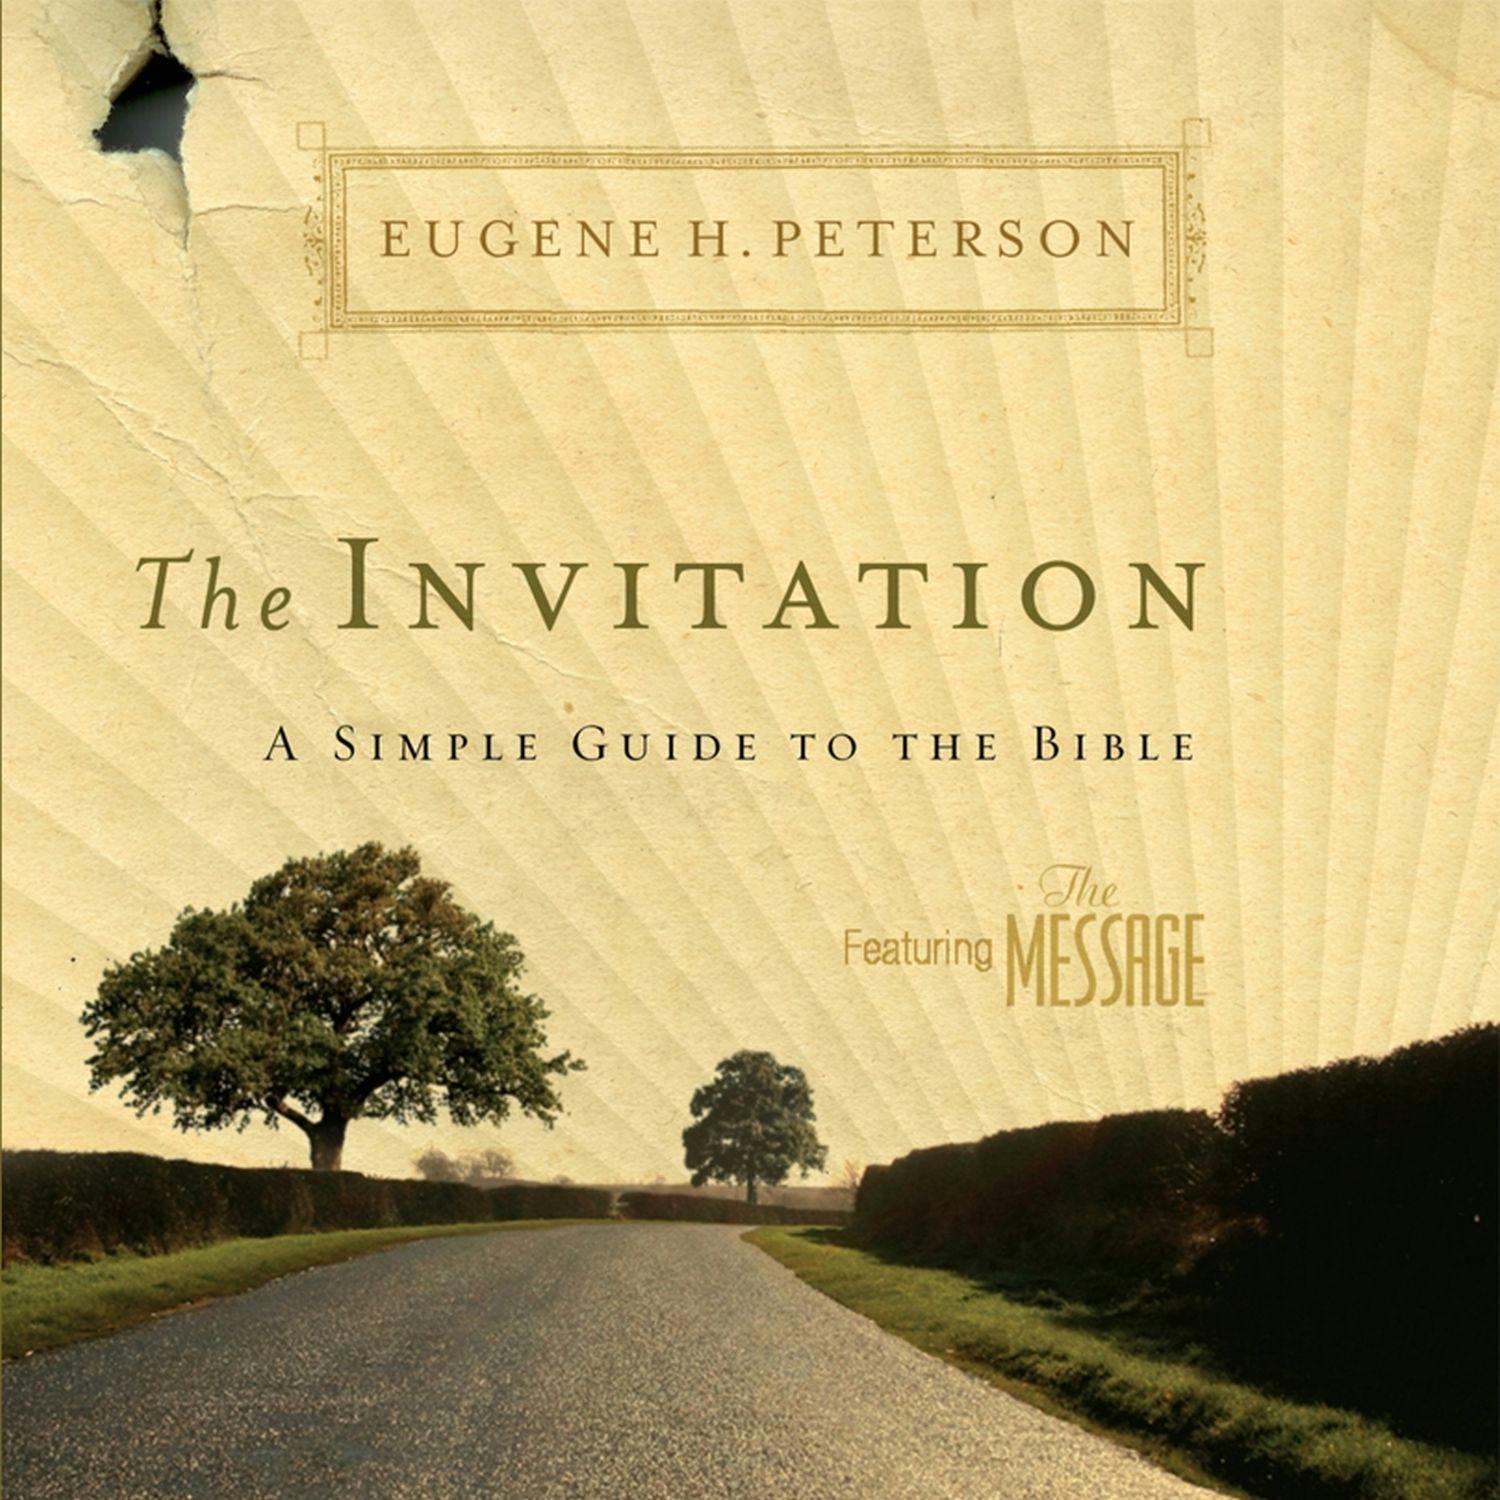 The Invitation: A Simple Guide to the Bible - Eugene H Peterson